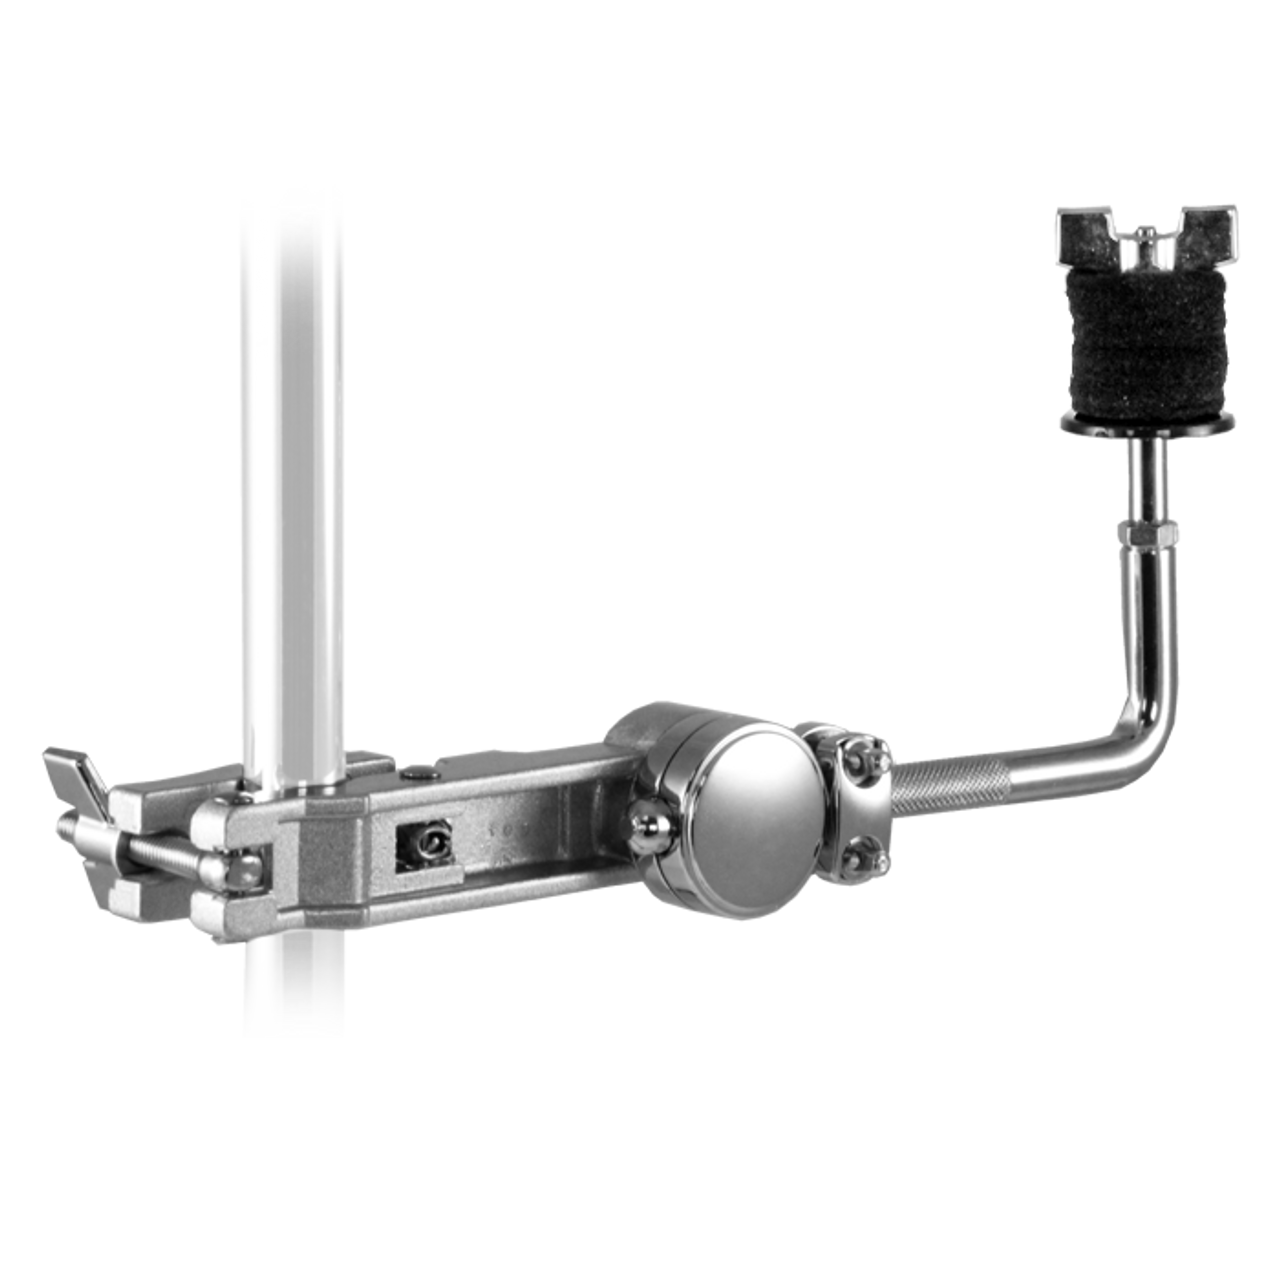 Adjustable angle. Quick release multi clamp.